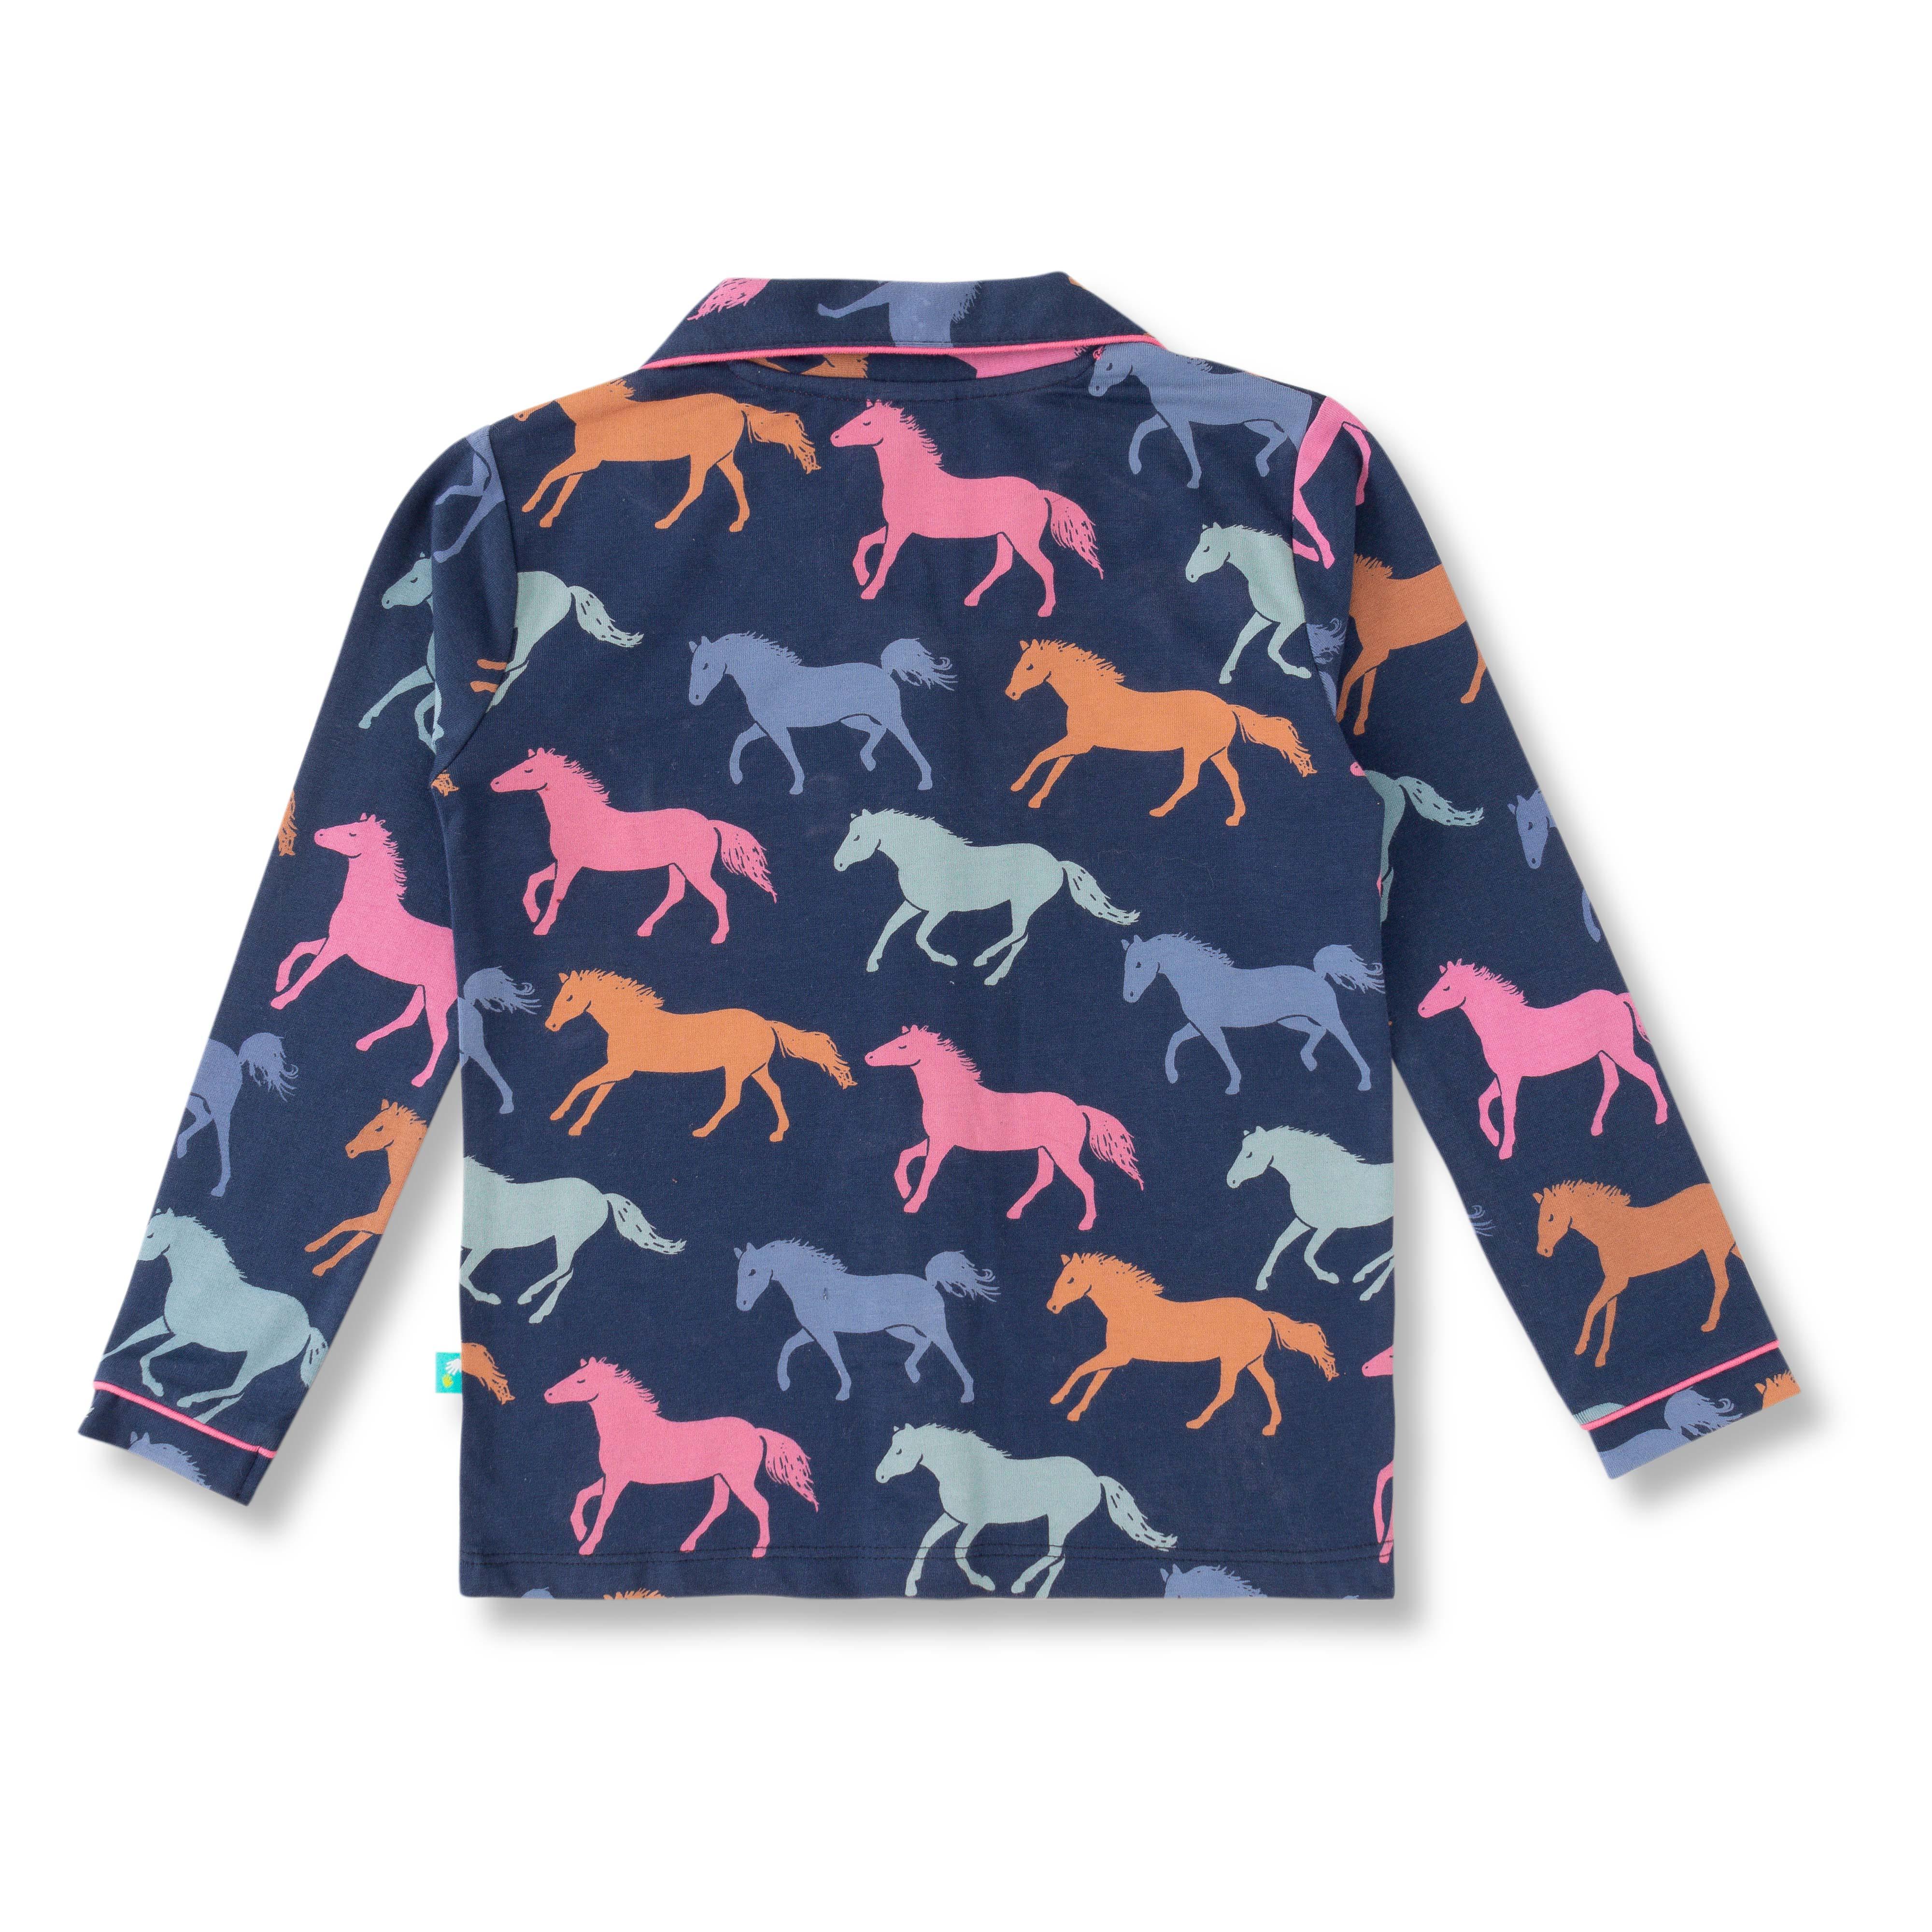 Young Girls Top & Bottom All Over Horse Printed Nightwear - Juscubs